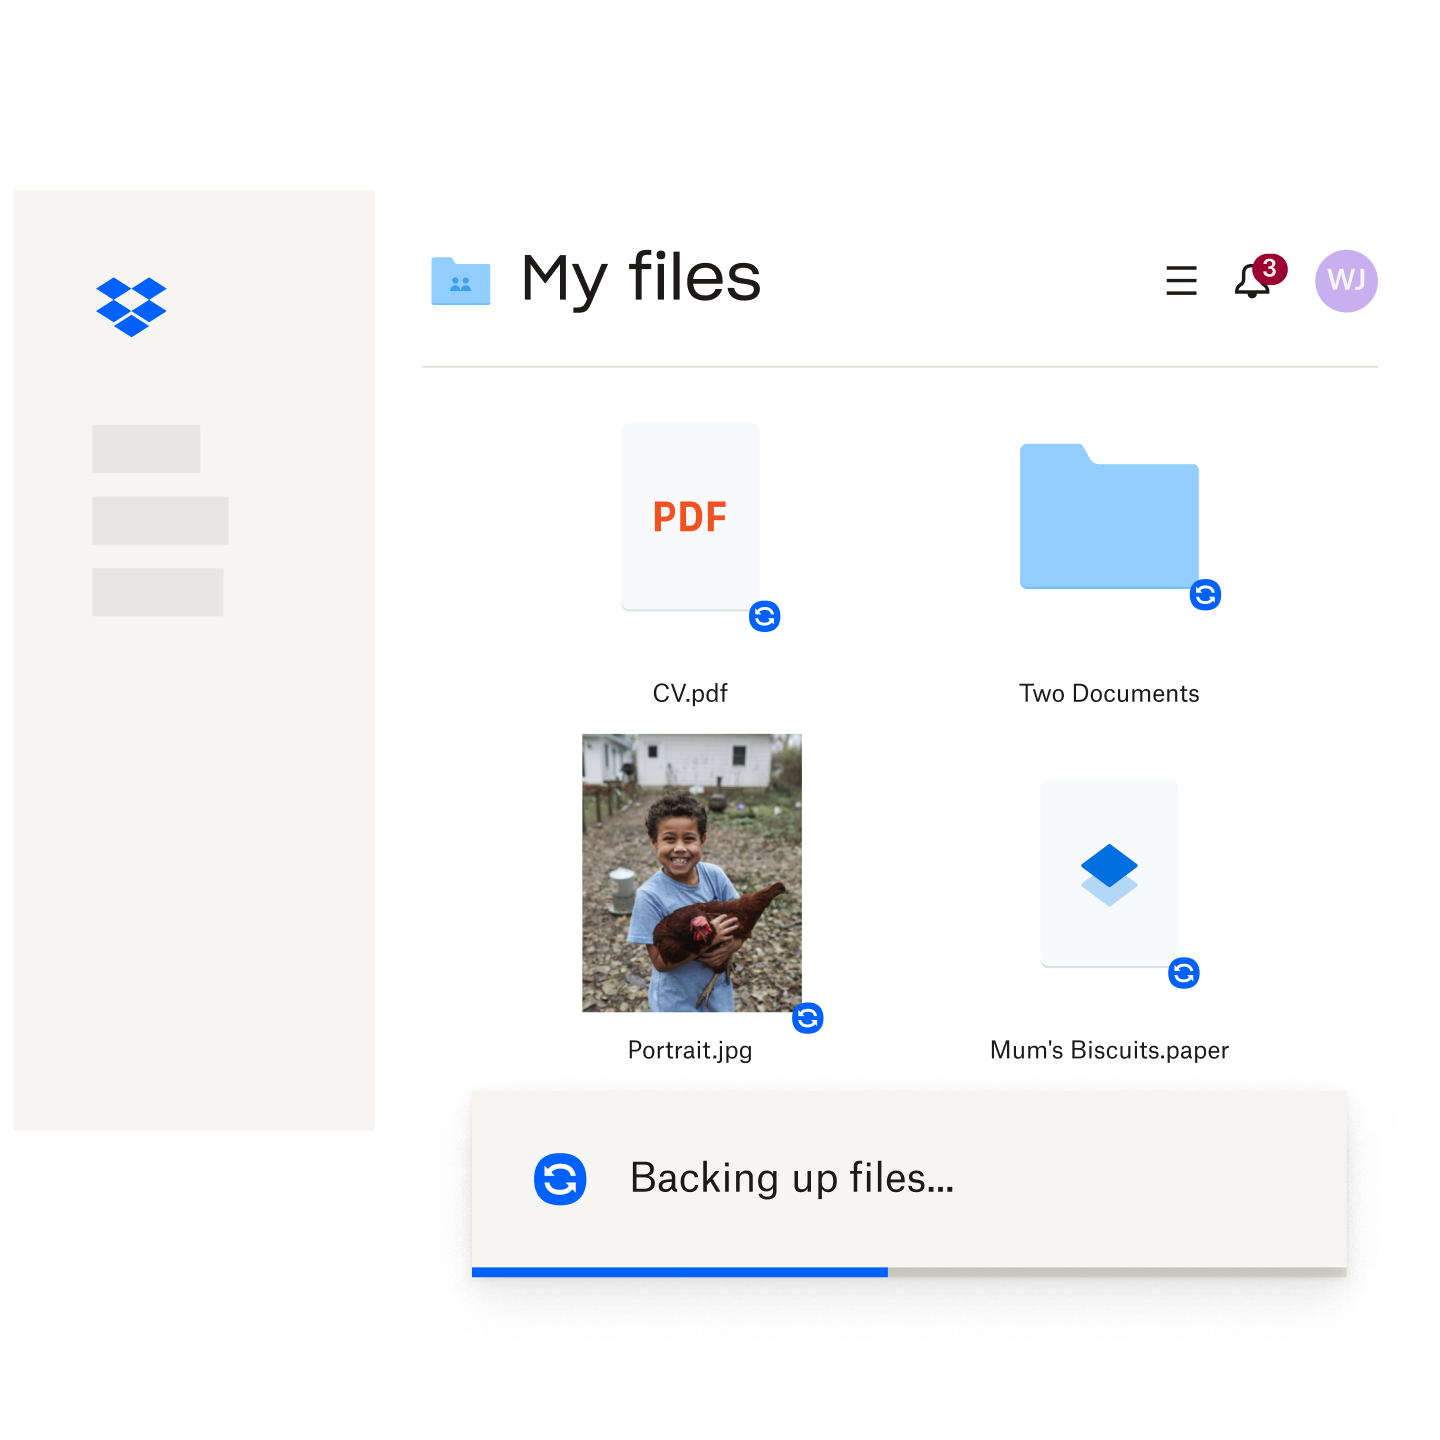 A dialogue box showing the progress of different types of files in Dropbox being backed up